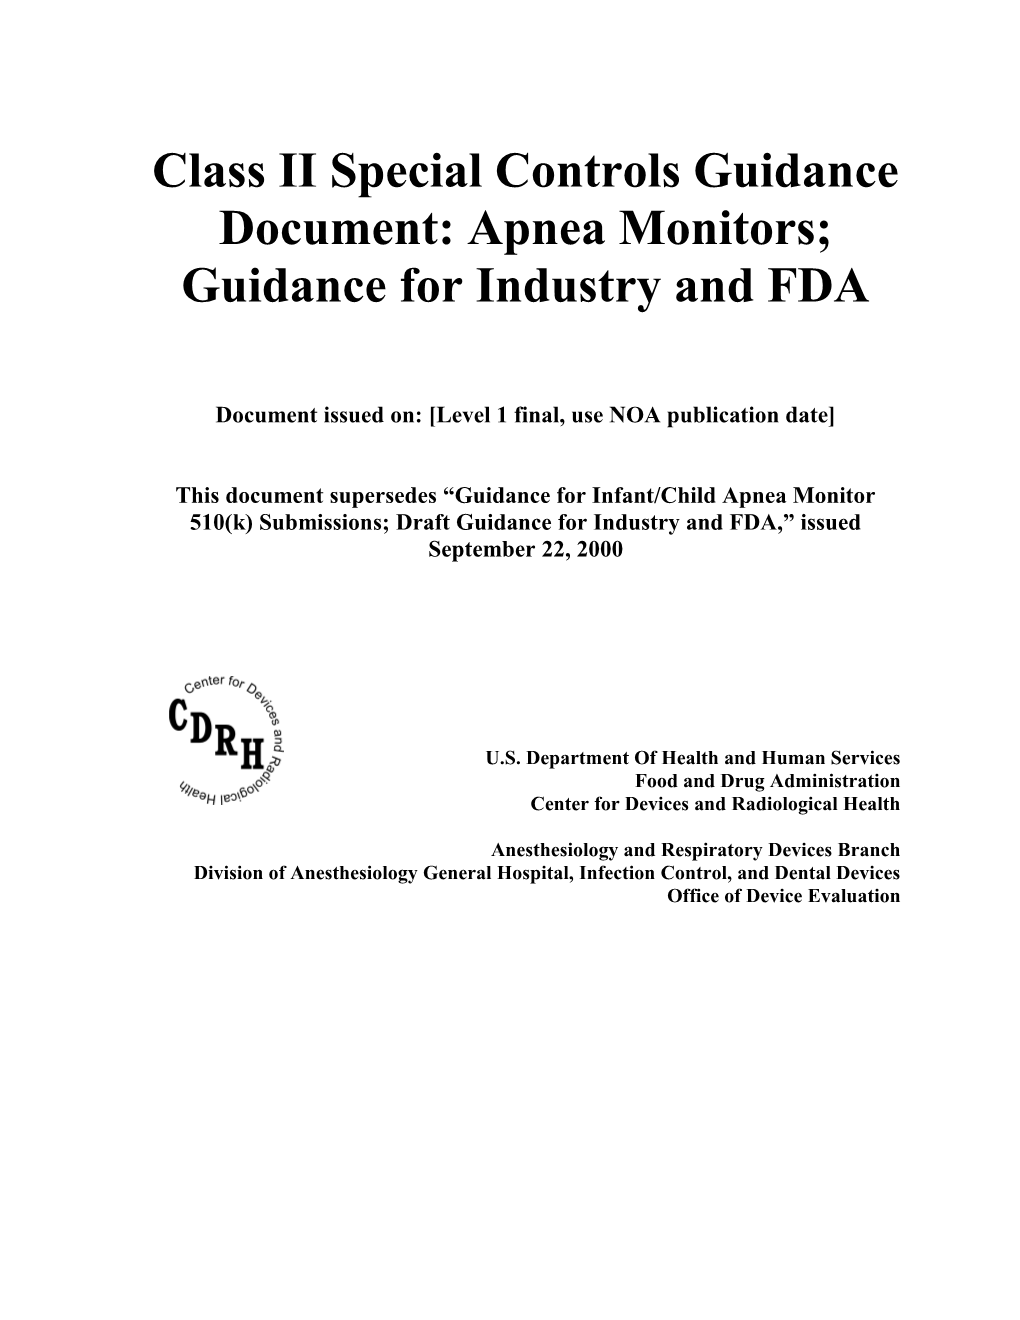 Class II Special Controls Guidance Document: Indwelling Blood Gas Analyzers; Final Guidance